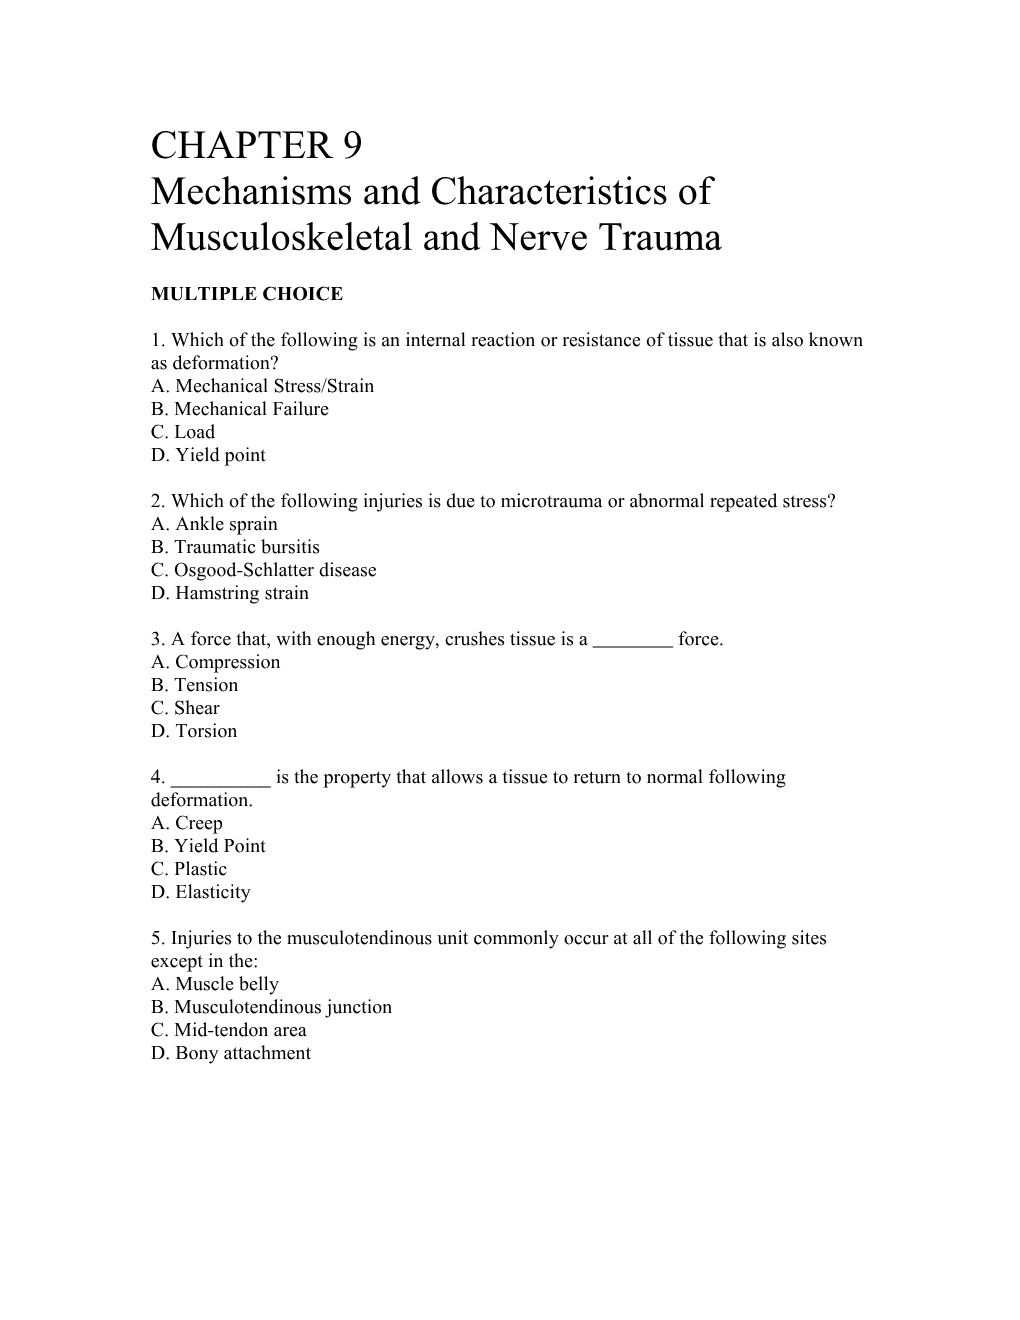 Mechanisms and Characteristics of Musculoskeletal and Nerve Trauma